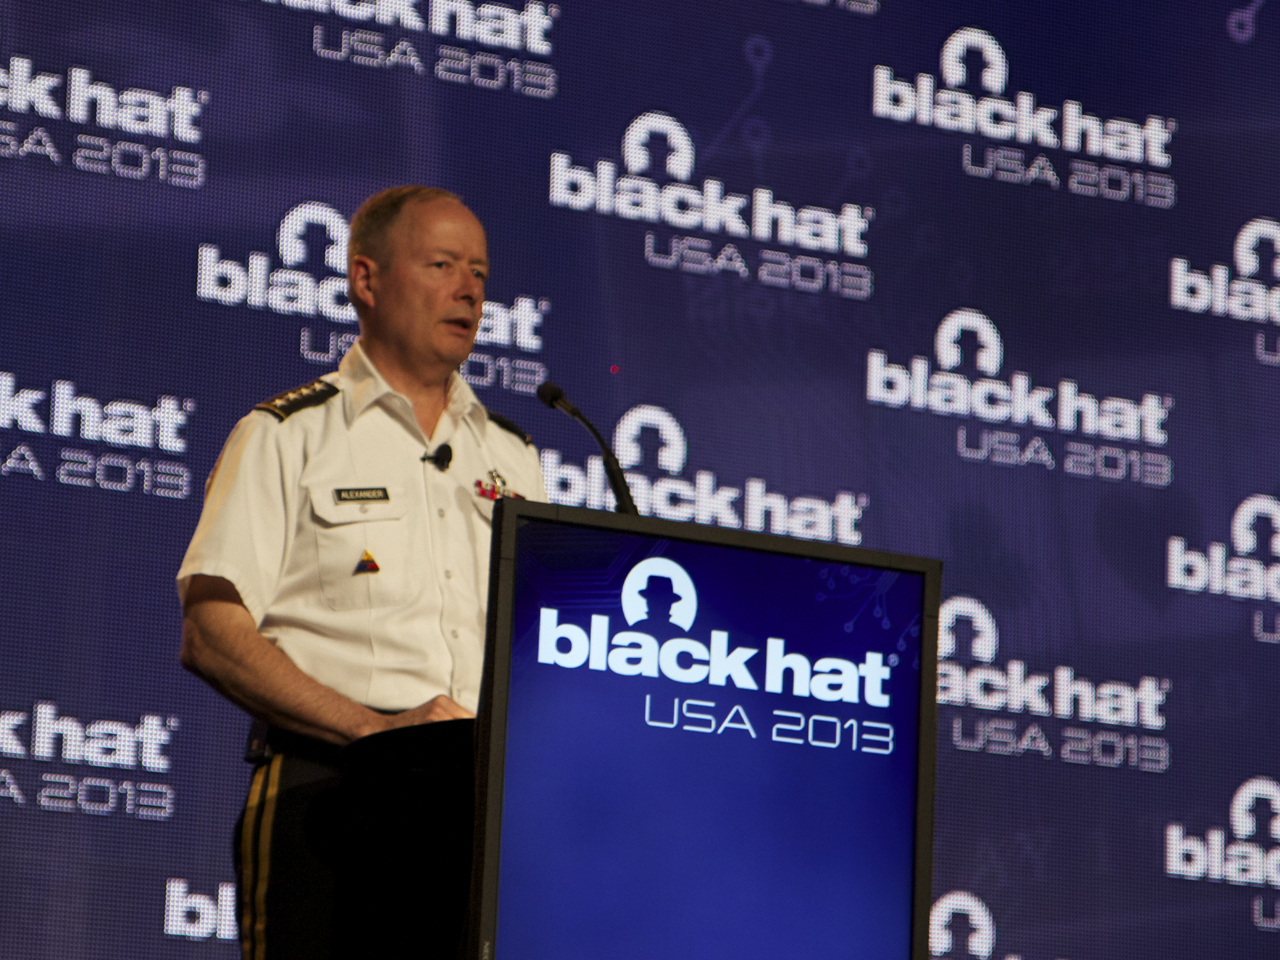 NSA director heckled at Black Hat cybersecurity conference CBS News